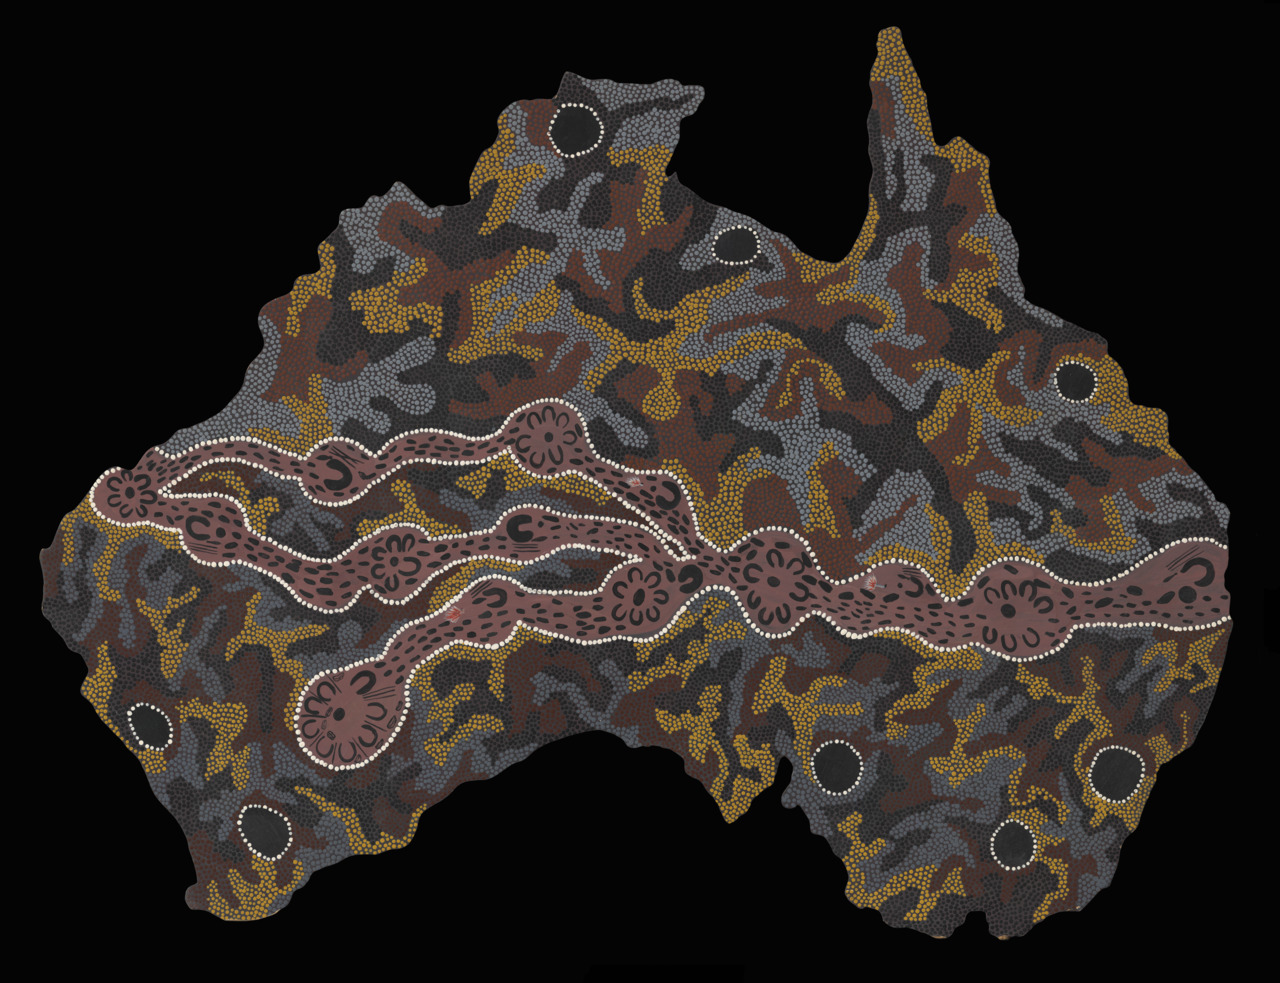 One of the colored maps of Australia, showing the places of the indigenous people in the middle.